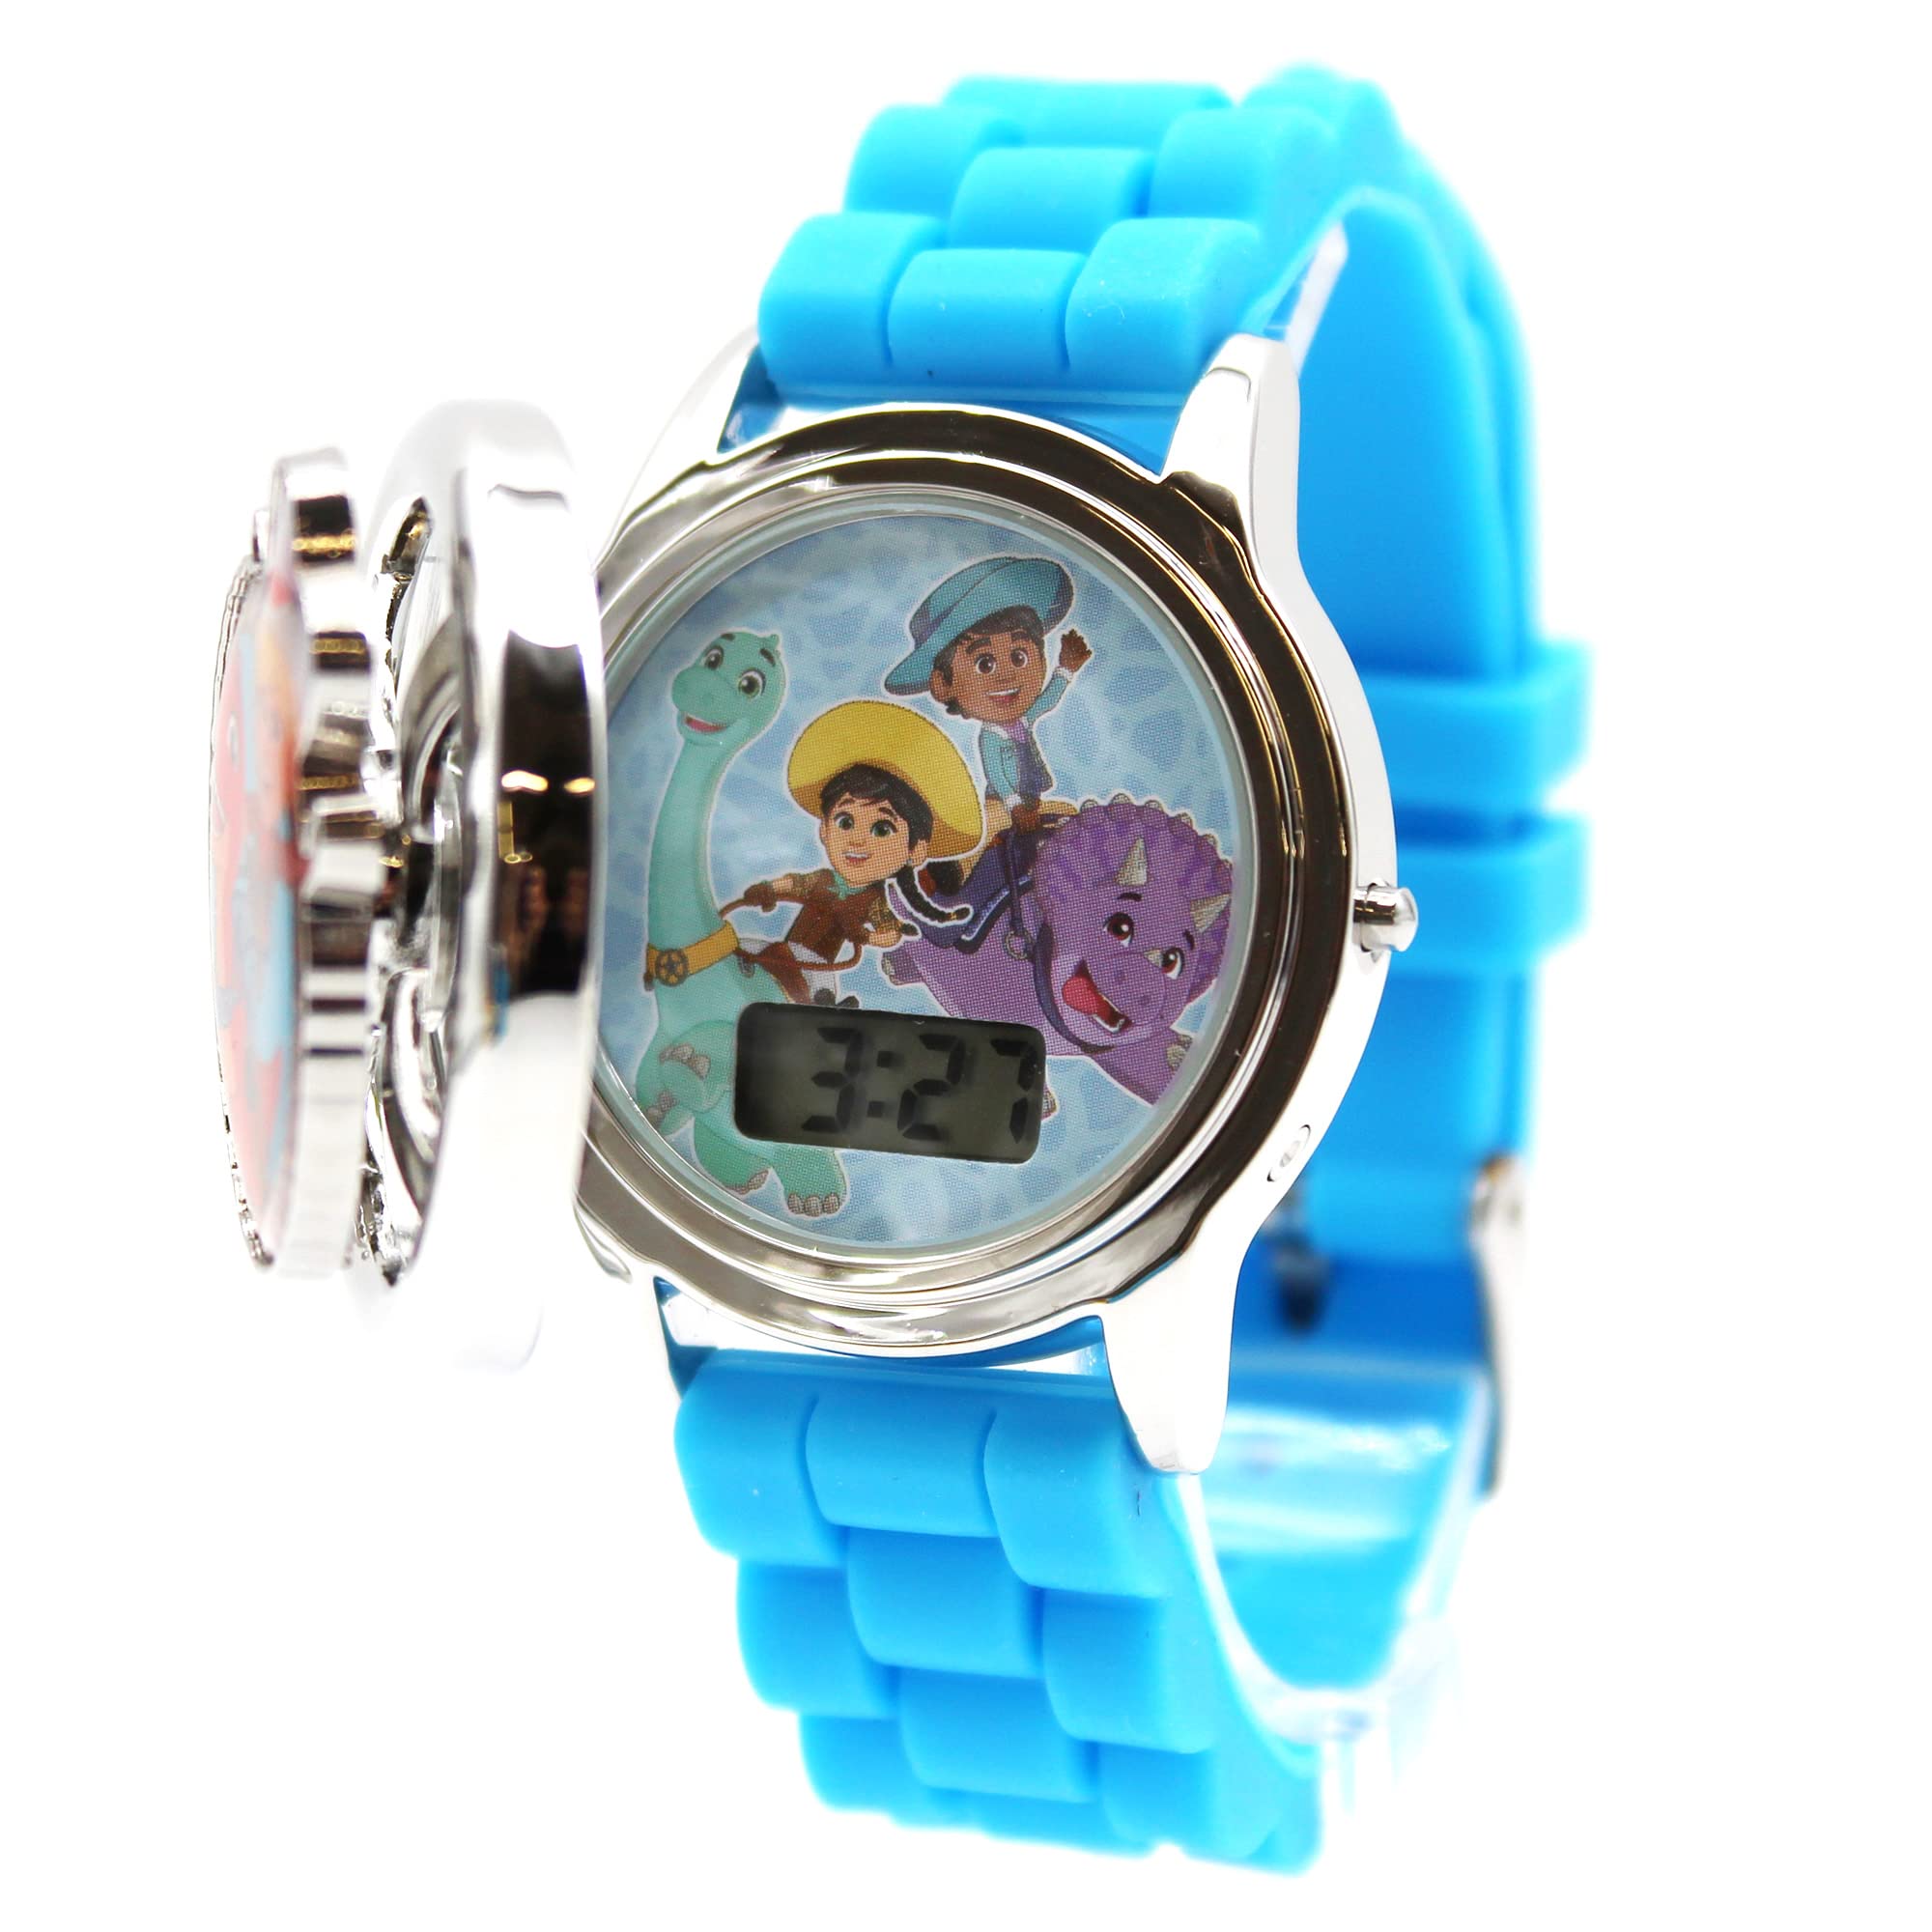 Accutime Kids Dino Ranch Digital LCD Quartz Childrens Wrist Watch for Boys, Girls, Toddlers with Multicolor Face, Blue Strap and Spinner Cover (Model: DNR4000AZ)